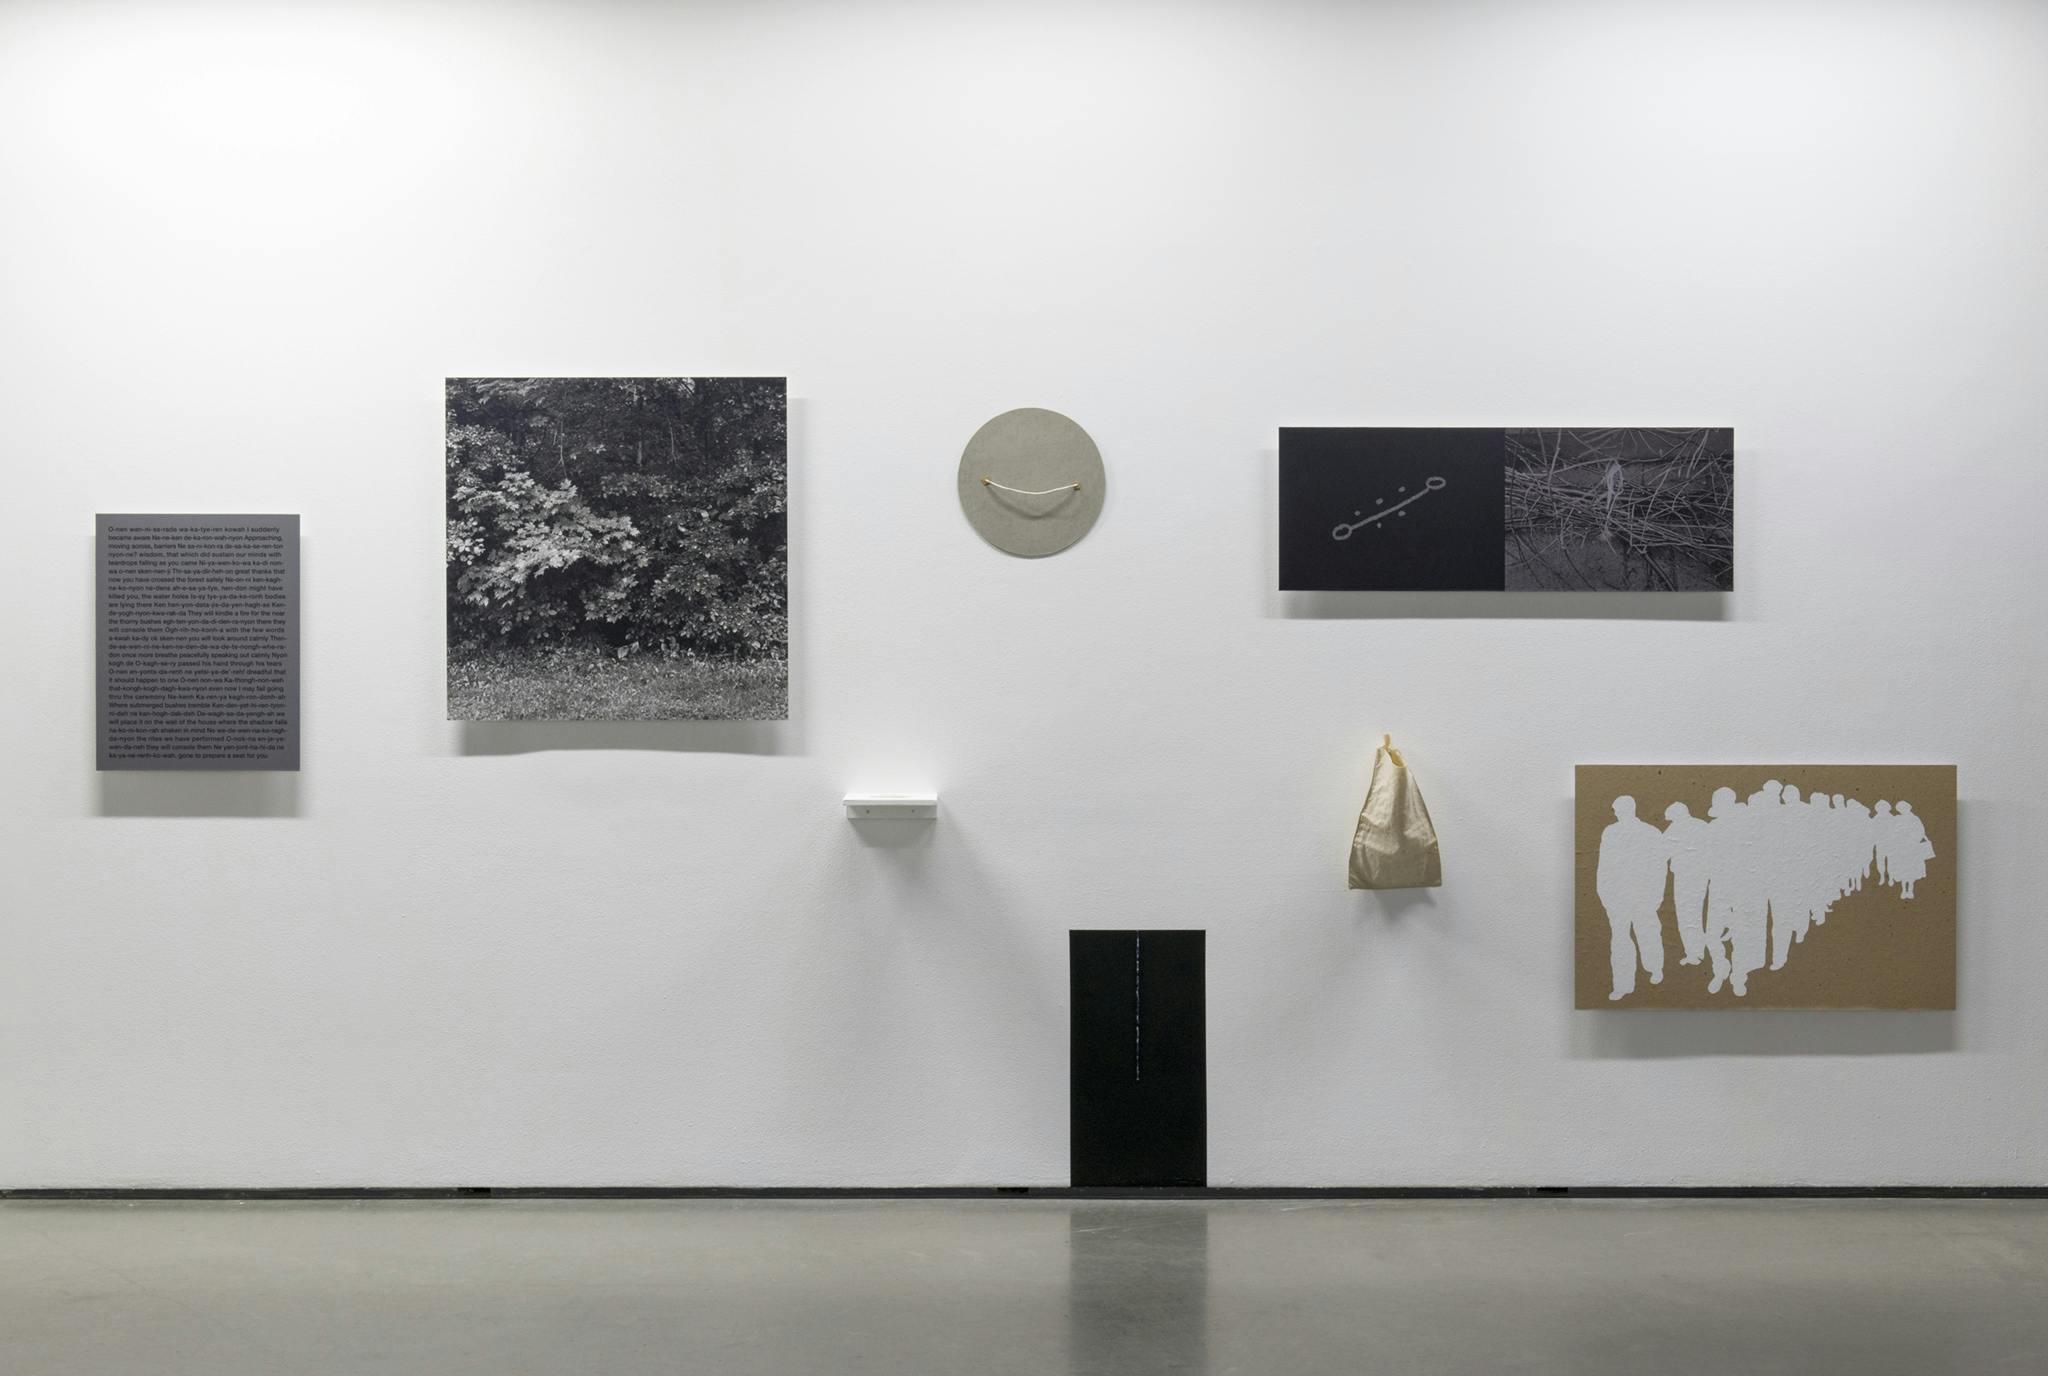 Multimedia objects hang on a gallery wall. Each object differs in form, from a text-based print, a black and white photograph, to a very small shelf and a cloth bag.